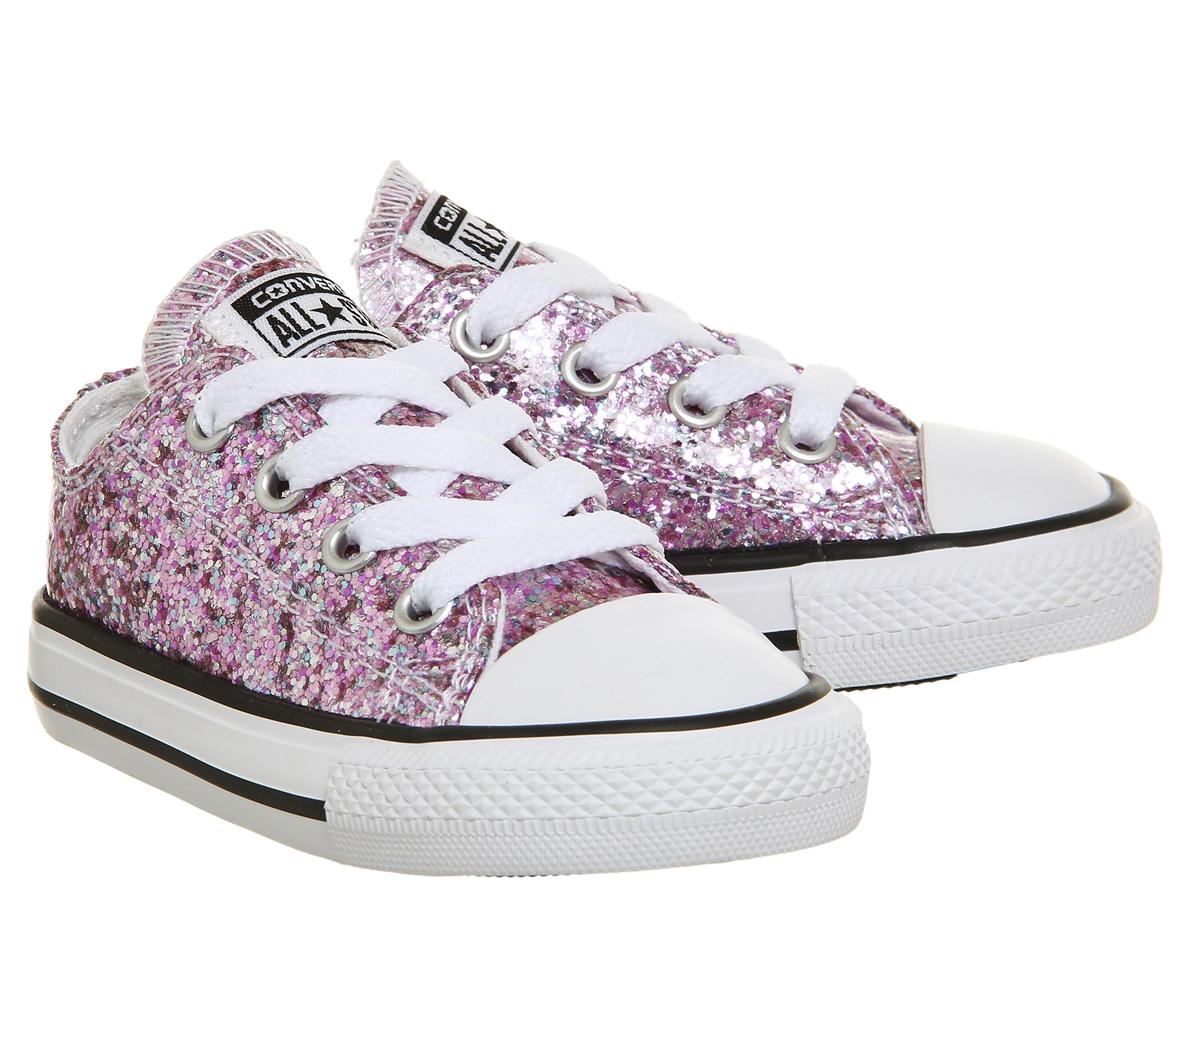 converse all star low infant frozen lilac glitter